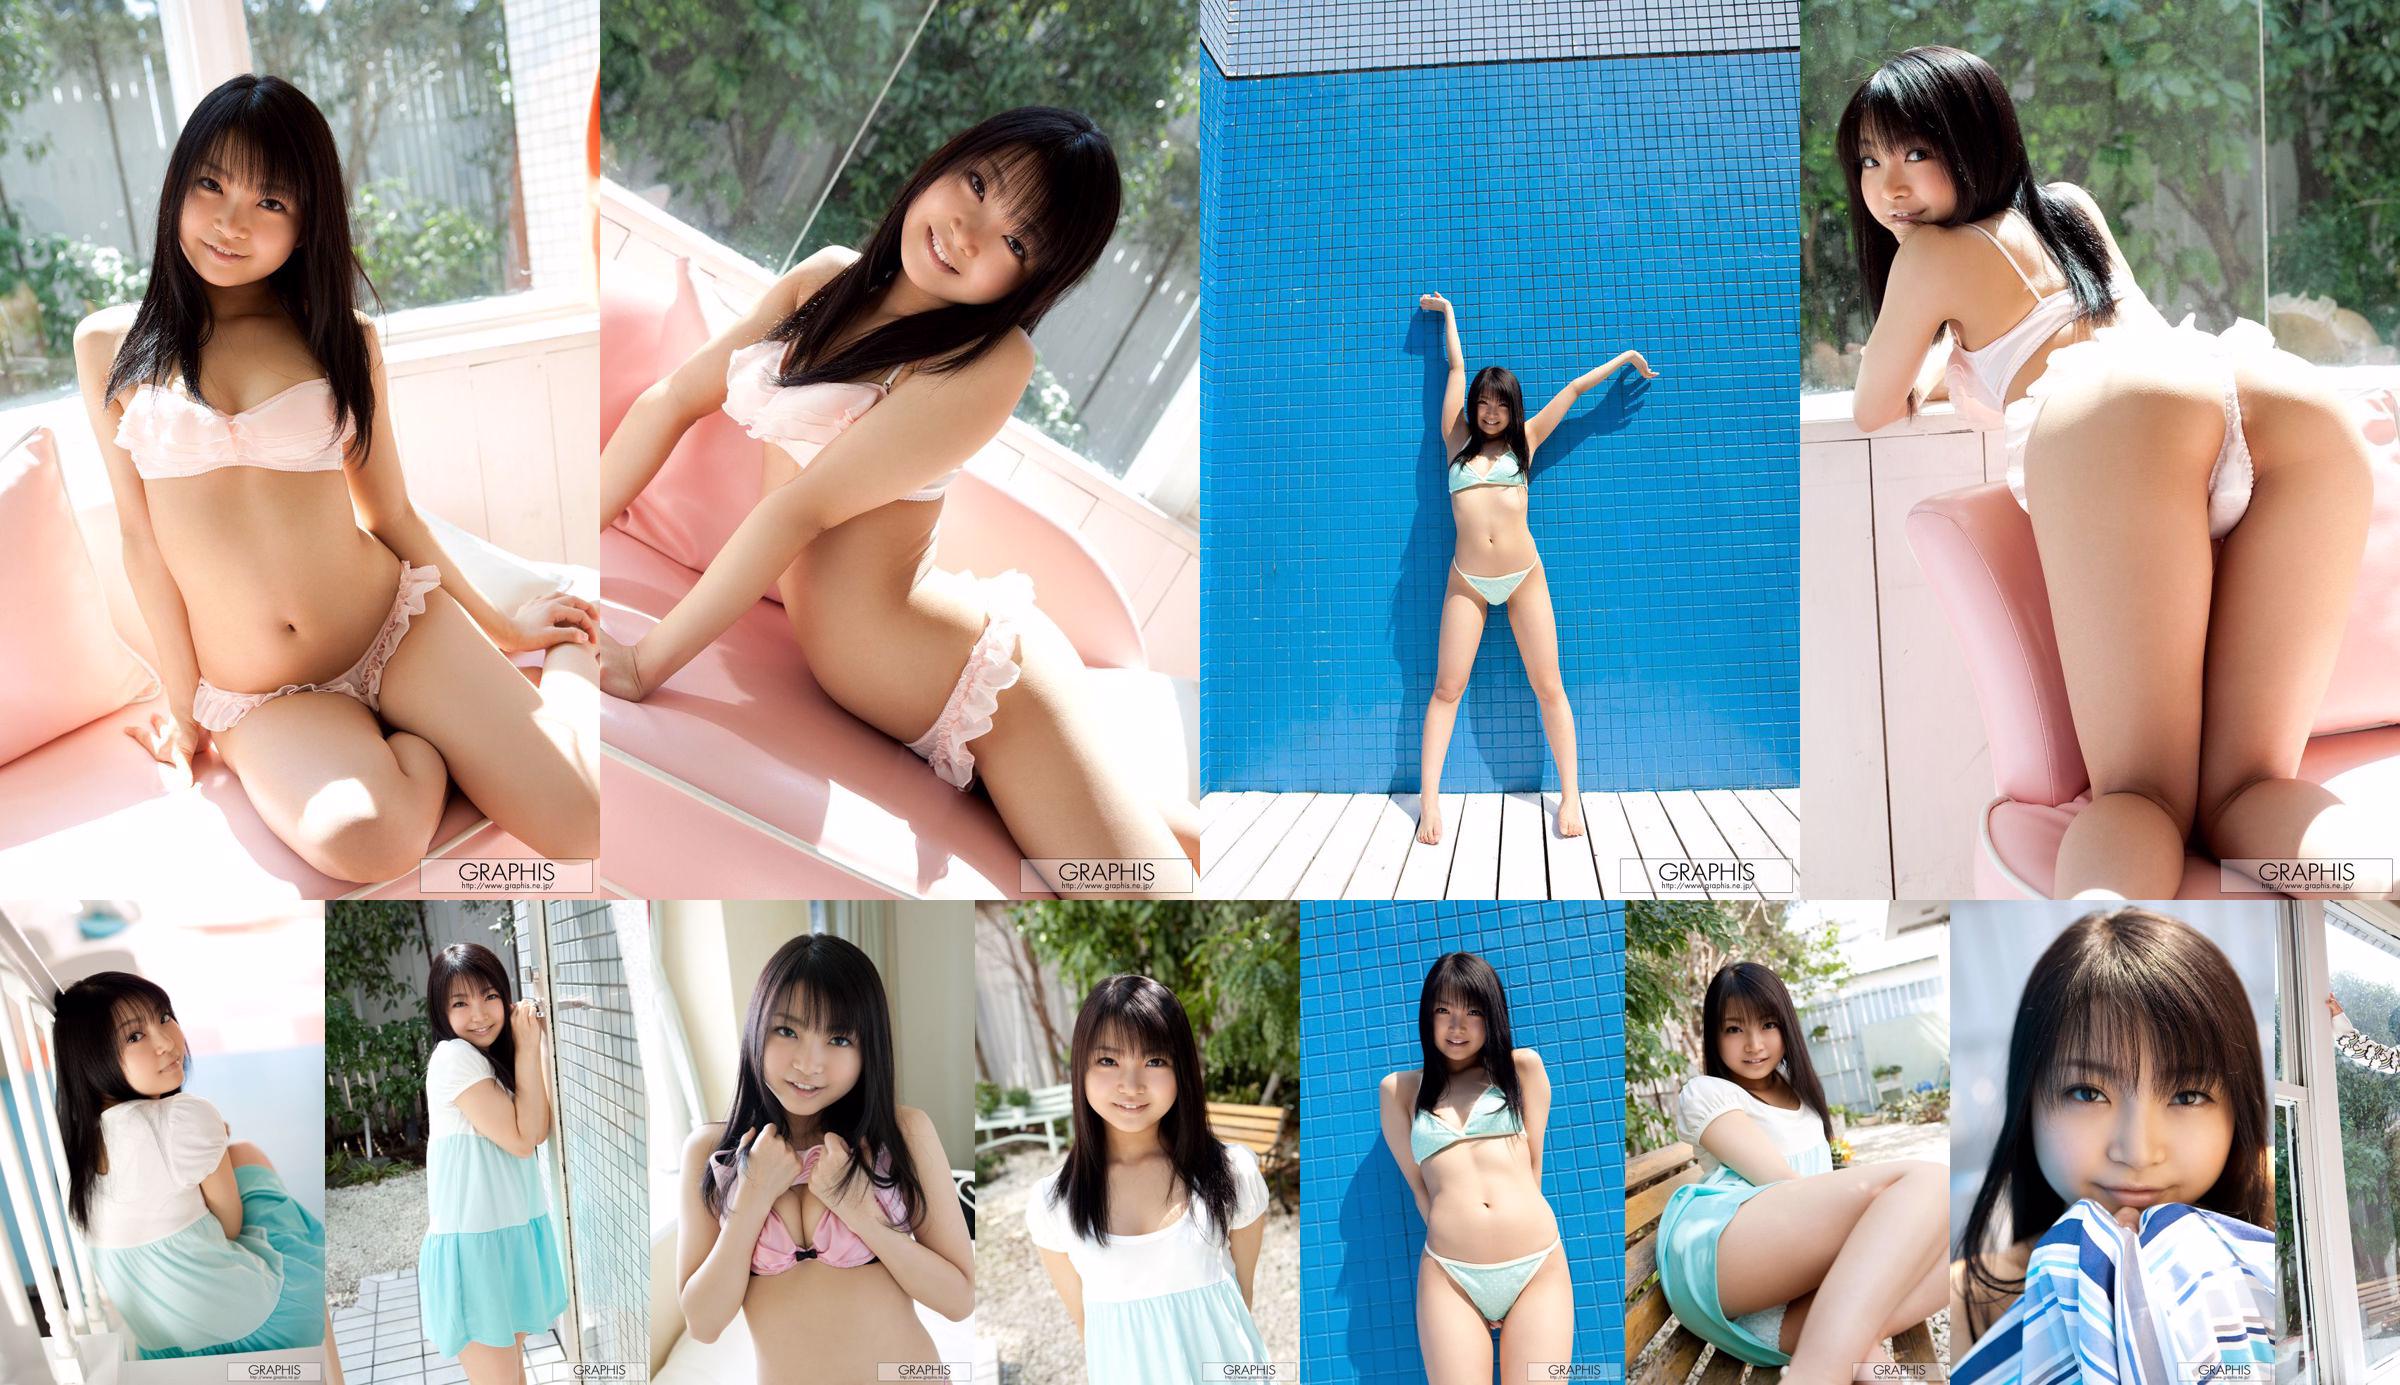 Chihiro Aoi / Chihiro Aoi [Graphis] First Gravure First off daughter No.44cee1 Page 12